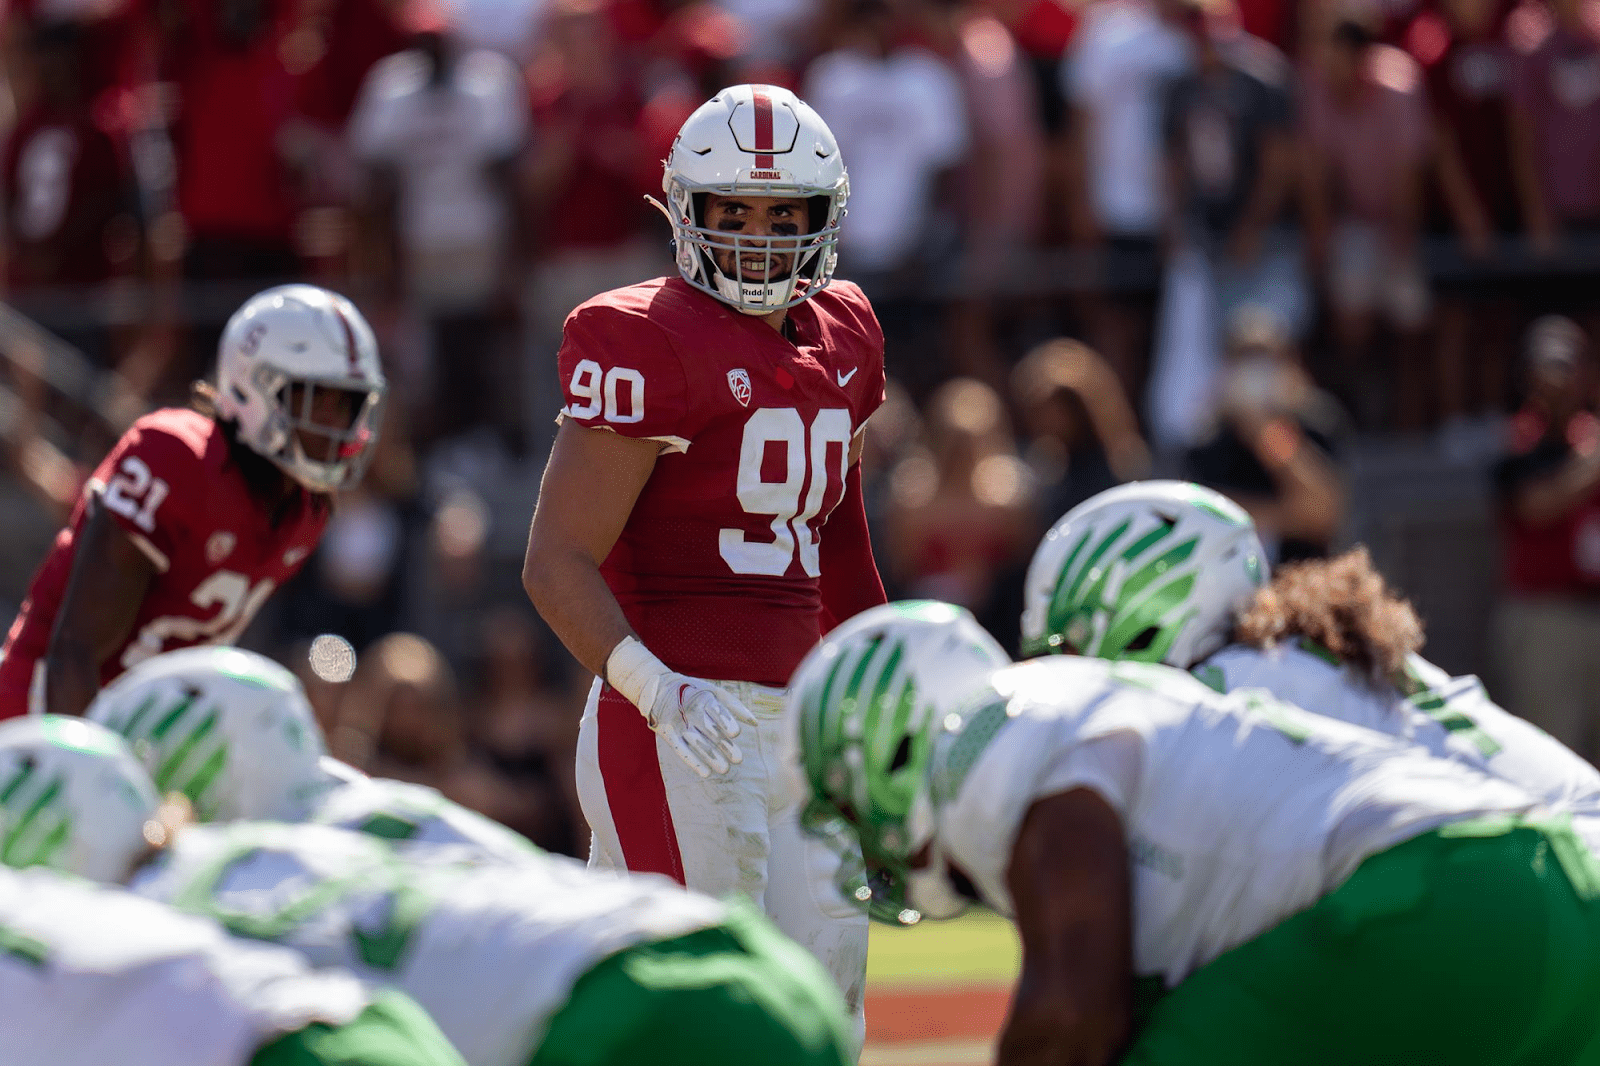 Gabe Reid came to Utah as a highly touted pass rusher from Stanford. His explosiveness off the edge make him an interesting NFL Prospect. Hula Bowl scout Syrus Amirian breaks down Reid's strengths and weaknesses in this article.